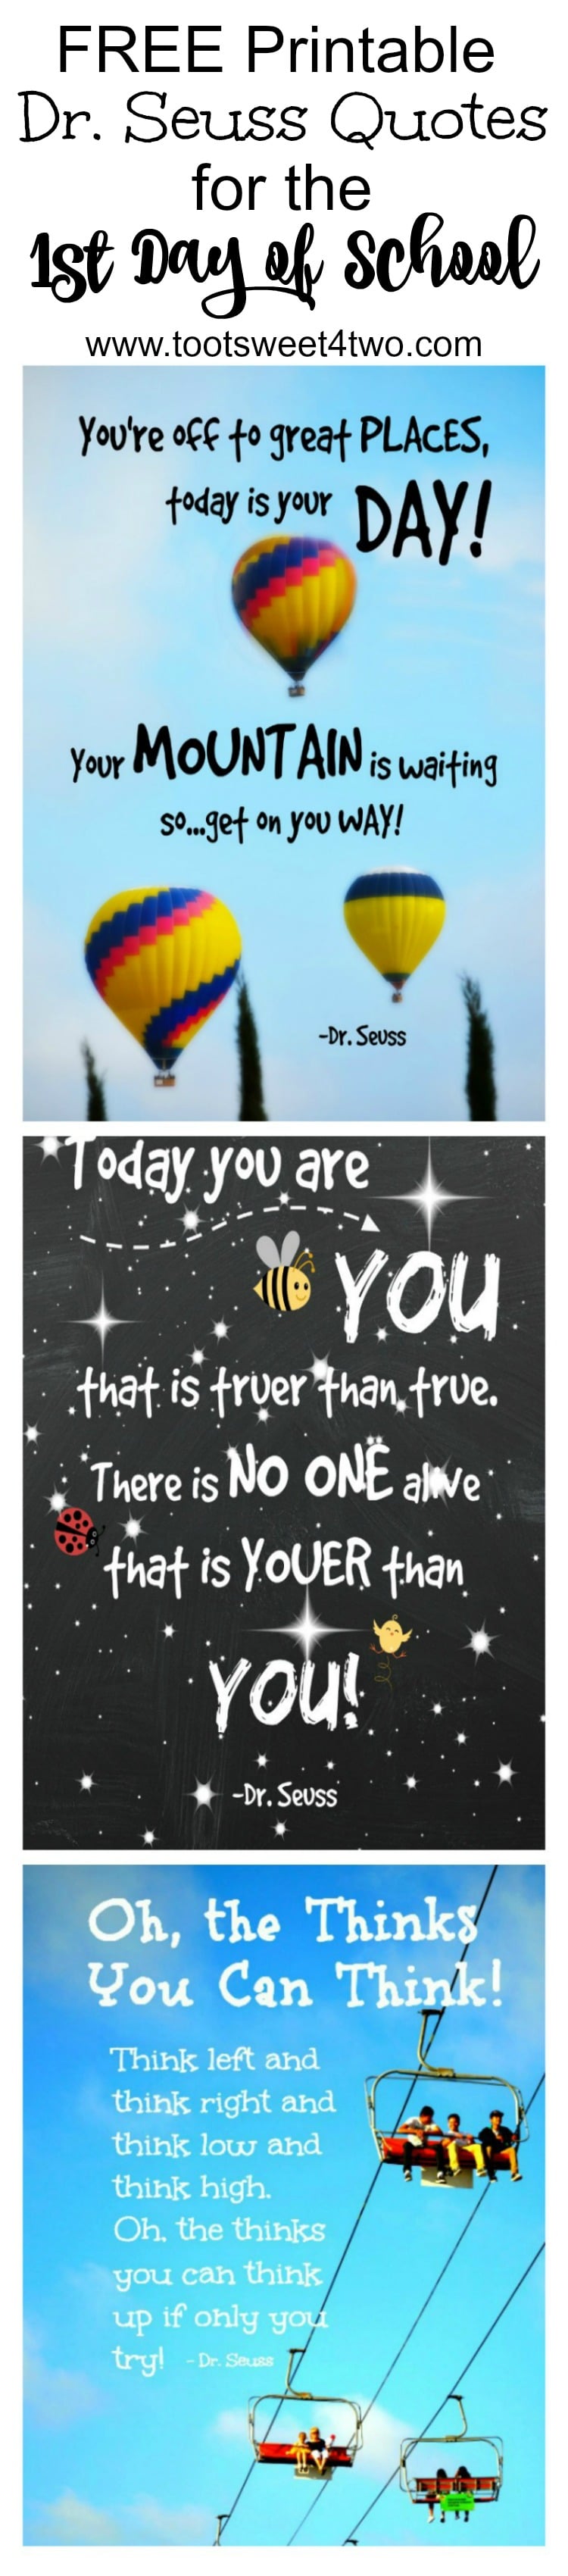 The "first" of anything is a life-affirming experience. And, the first day of school will never come again. As a mother or father with a child ready to embark on this rite of passage, prepare ahead so you will savor the moment. Get this FREE printable quote and others, suitable for framing and sharing on social media at www.tootsweet4two.com.